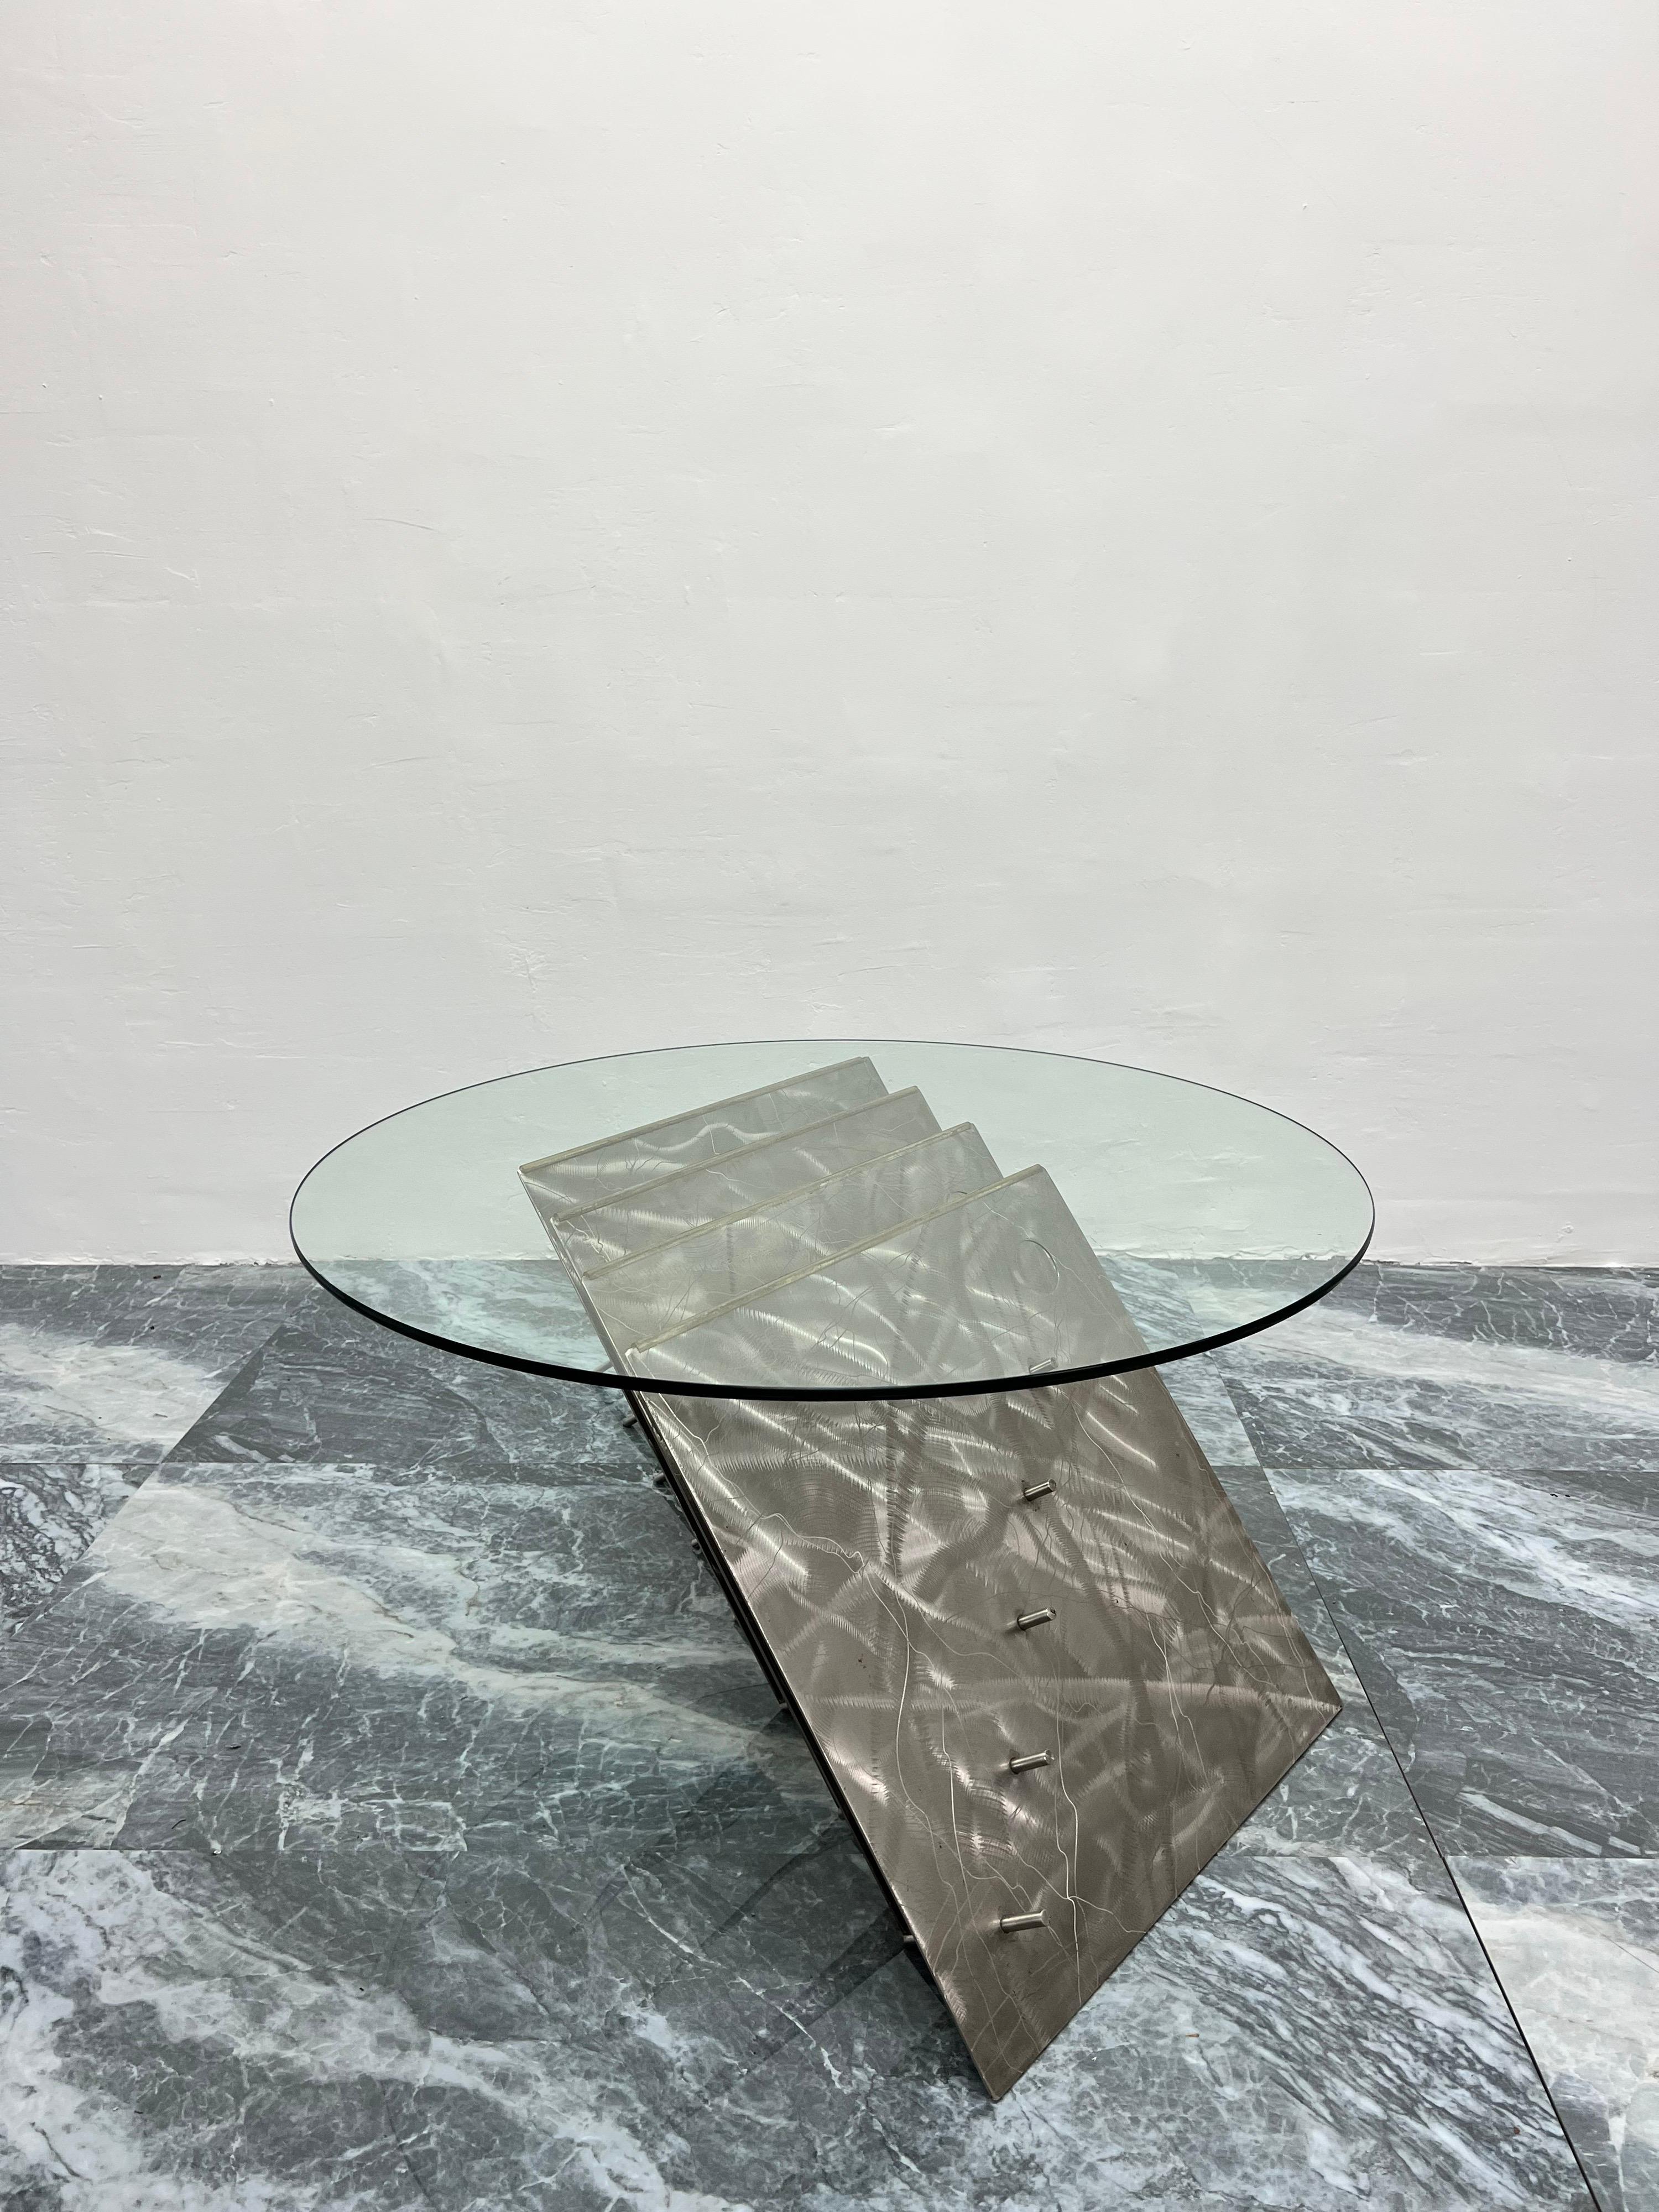 Modern American Contemporary Custom Made Steel and Glass Art Coffee Table, USA 1990s For Sale